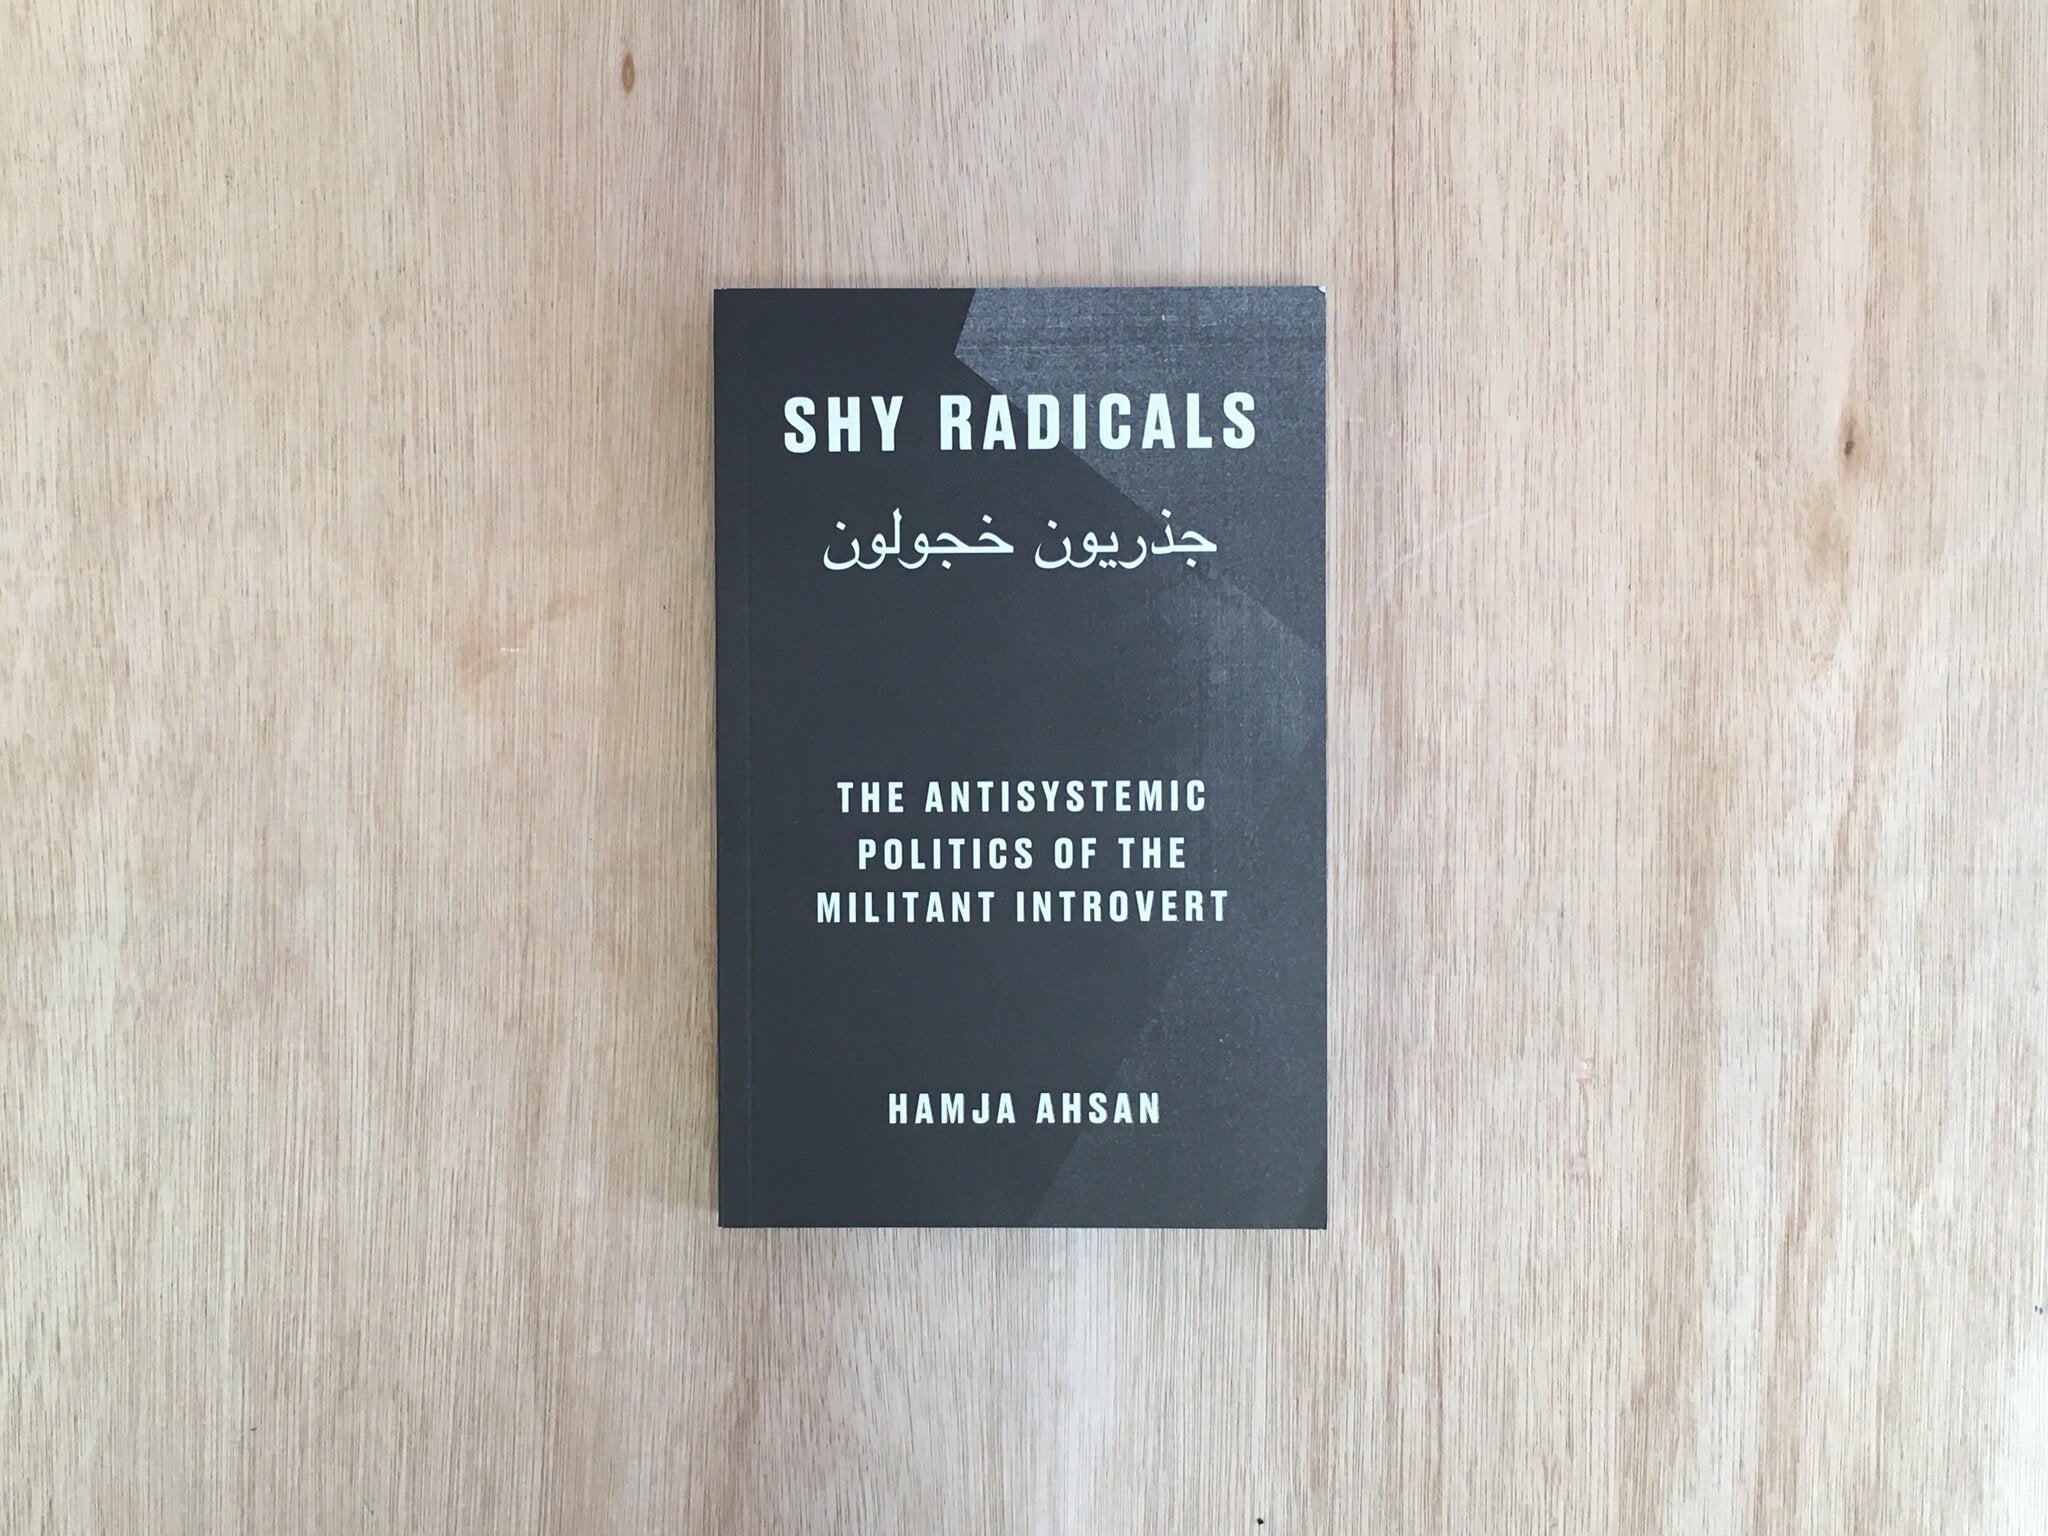 SHY RADICALS: THE ANTISYSTEMIC POLITICS OF THE MILITANT INTROVERT by Hamja Ahsan